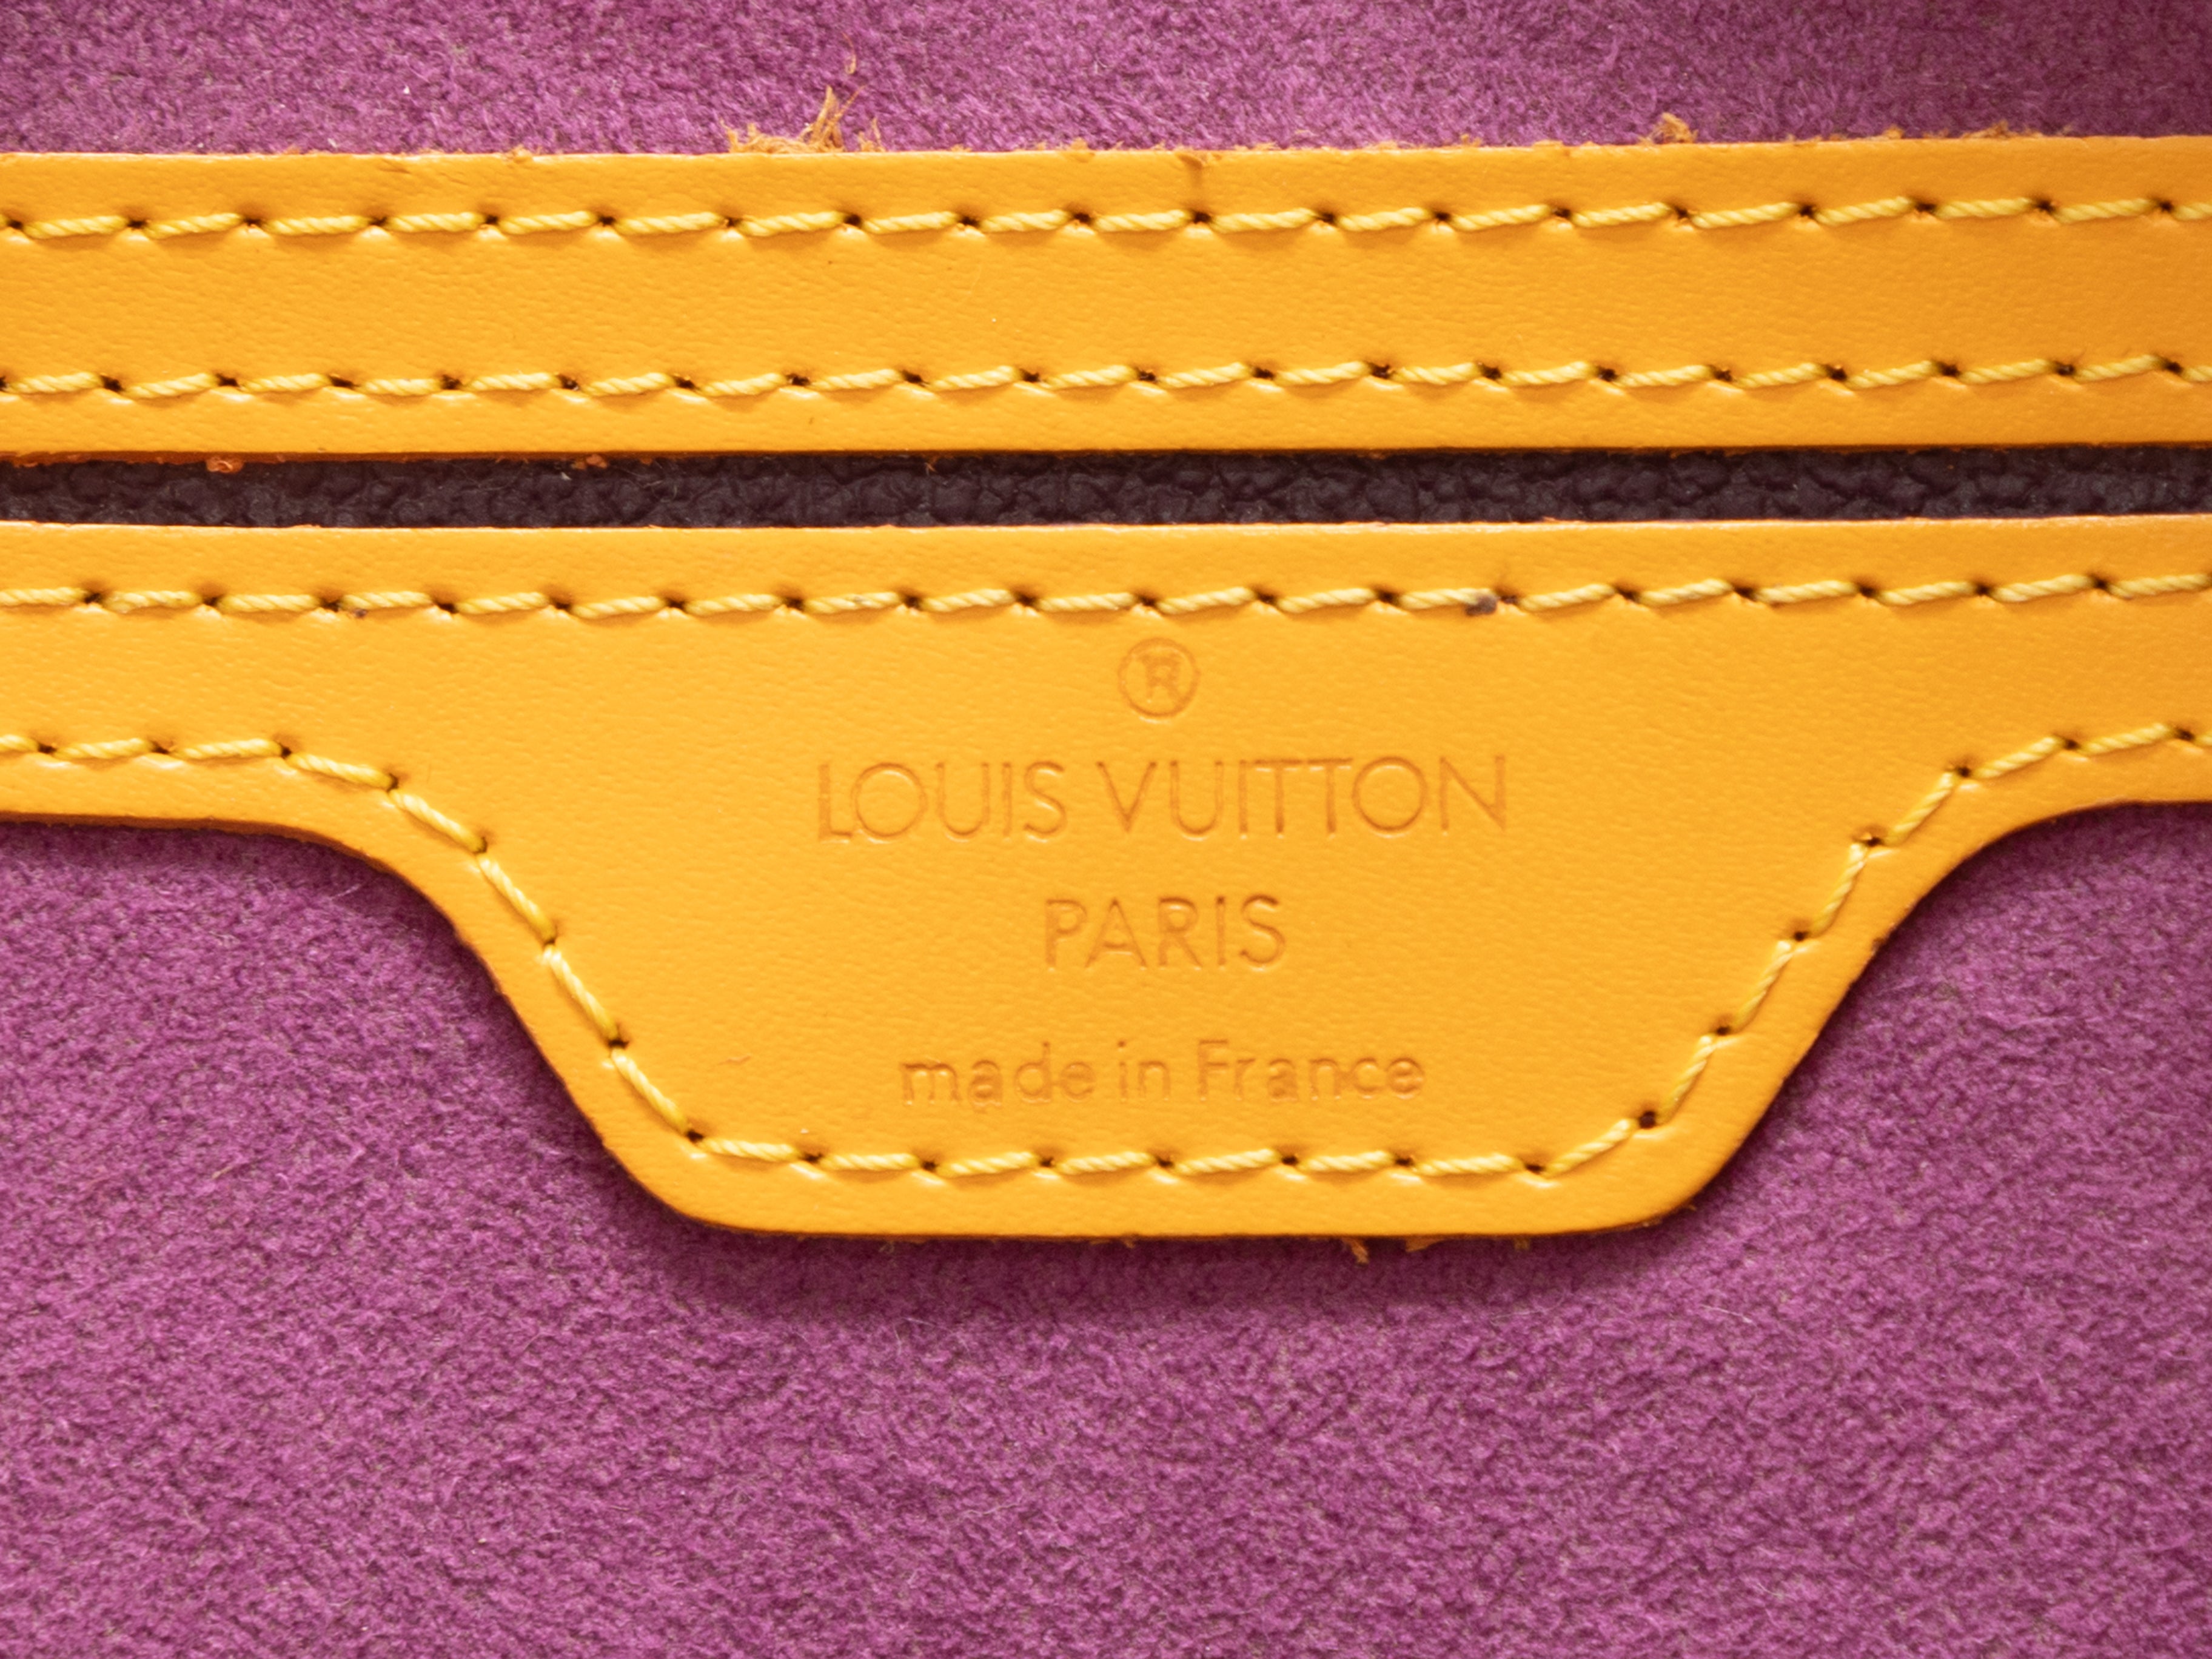 Buy Free Shipping Authentic Pre-owned Louis Vuitton Lv Epi Tassili Yellow  Jaune Mabillon Backpack Bag M52239 220119 from Japan - Buy authentic Plus  exclusive items from Japan